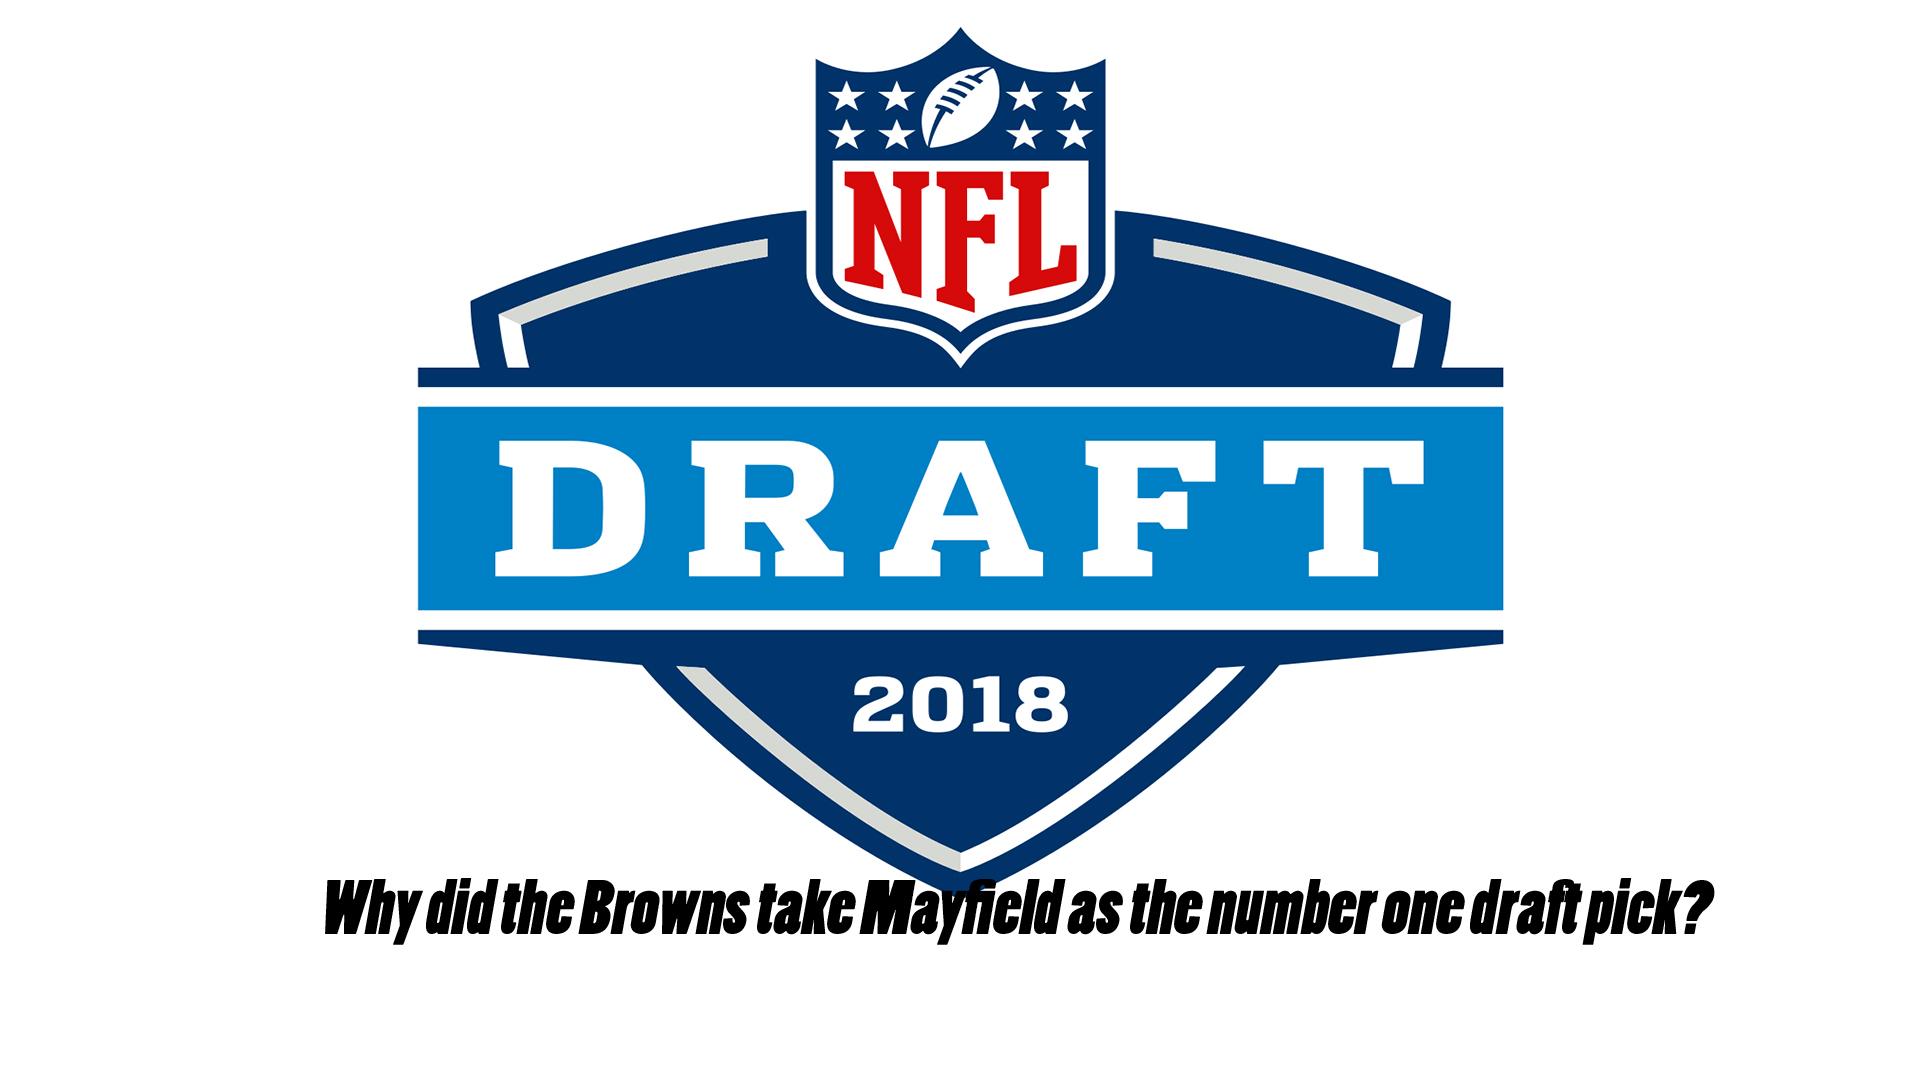 NFL Draft, why did the Browns chose Mayfield instead of Darnold, Rosen or Allen?